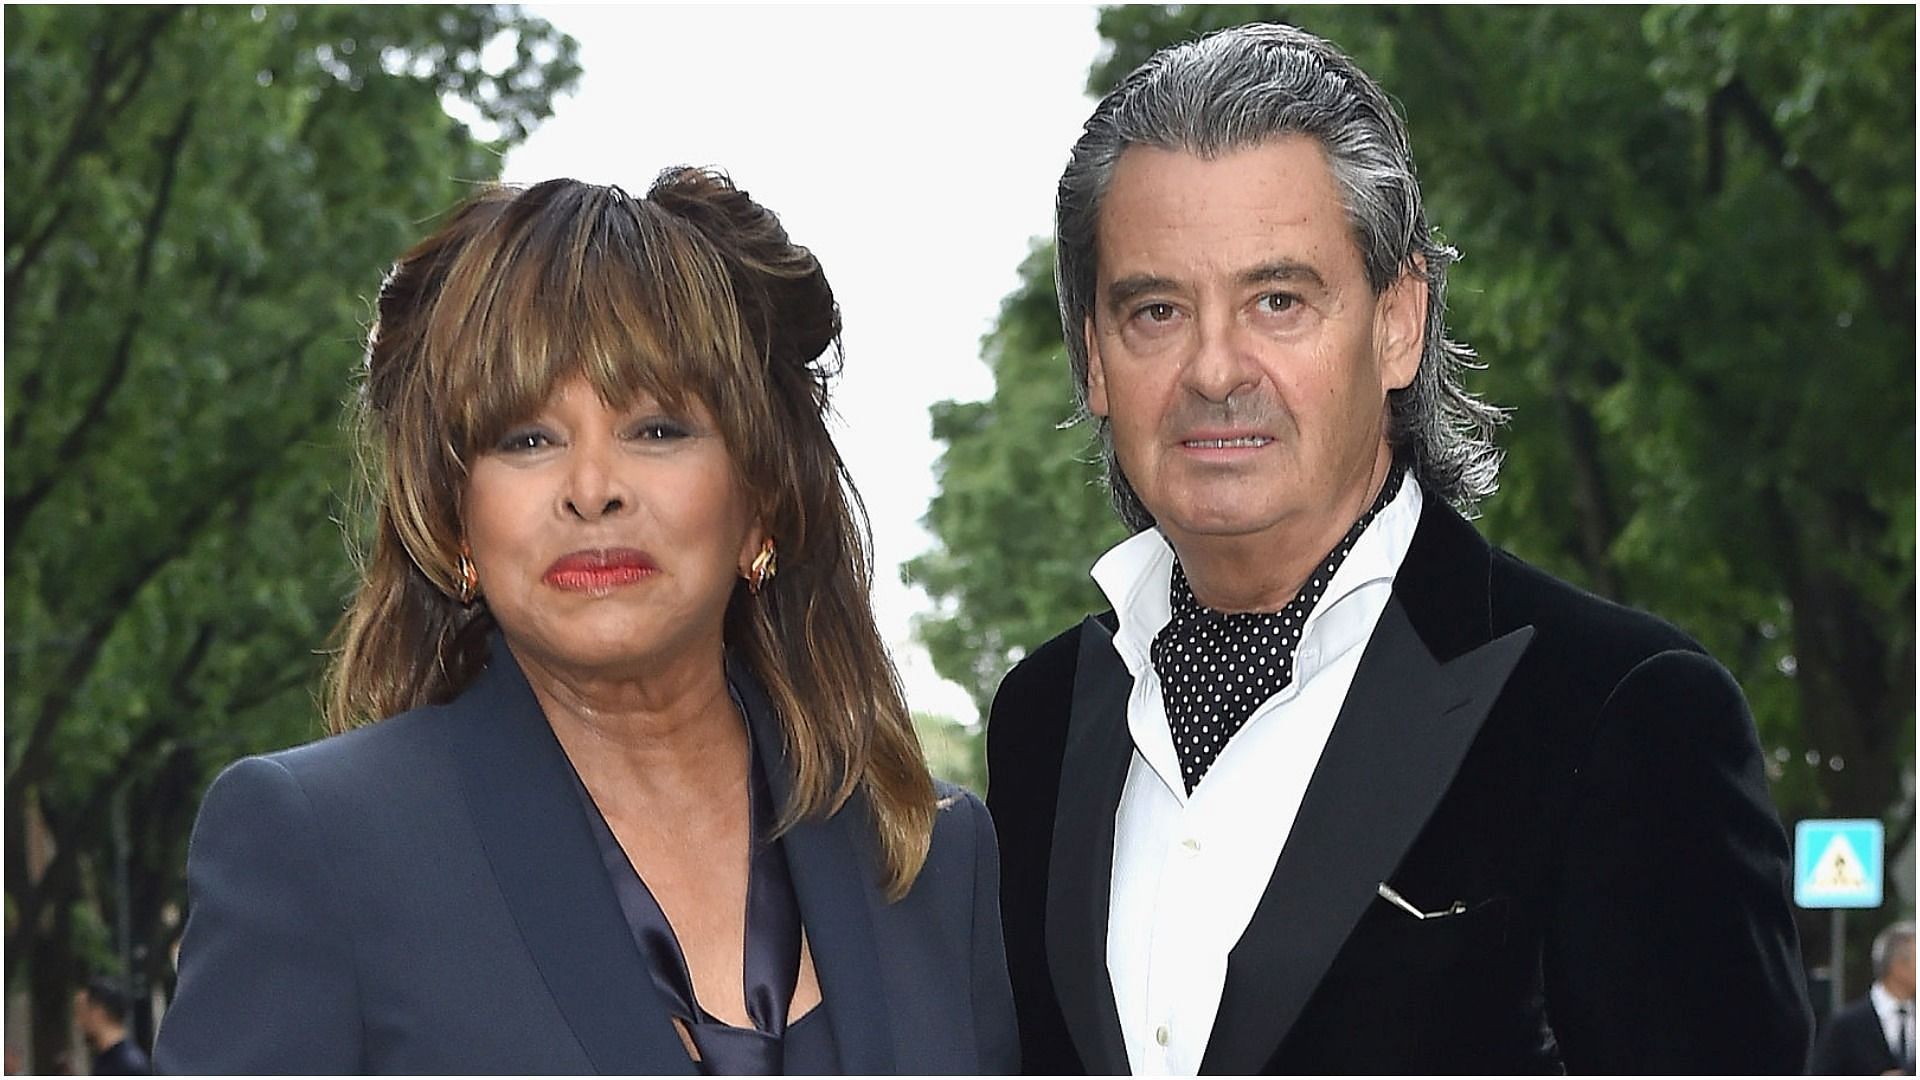 Tina Turner and Erwin Bach purchased a house together (Image via Jacopo Raule/Getty Images)